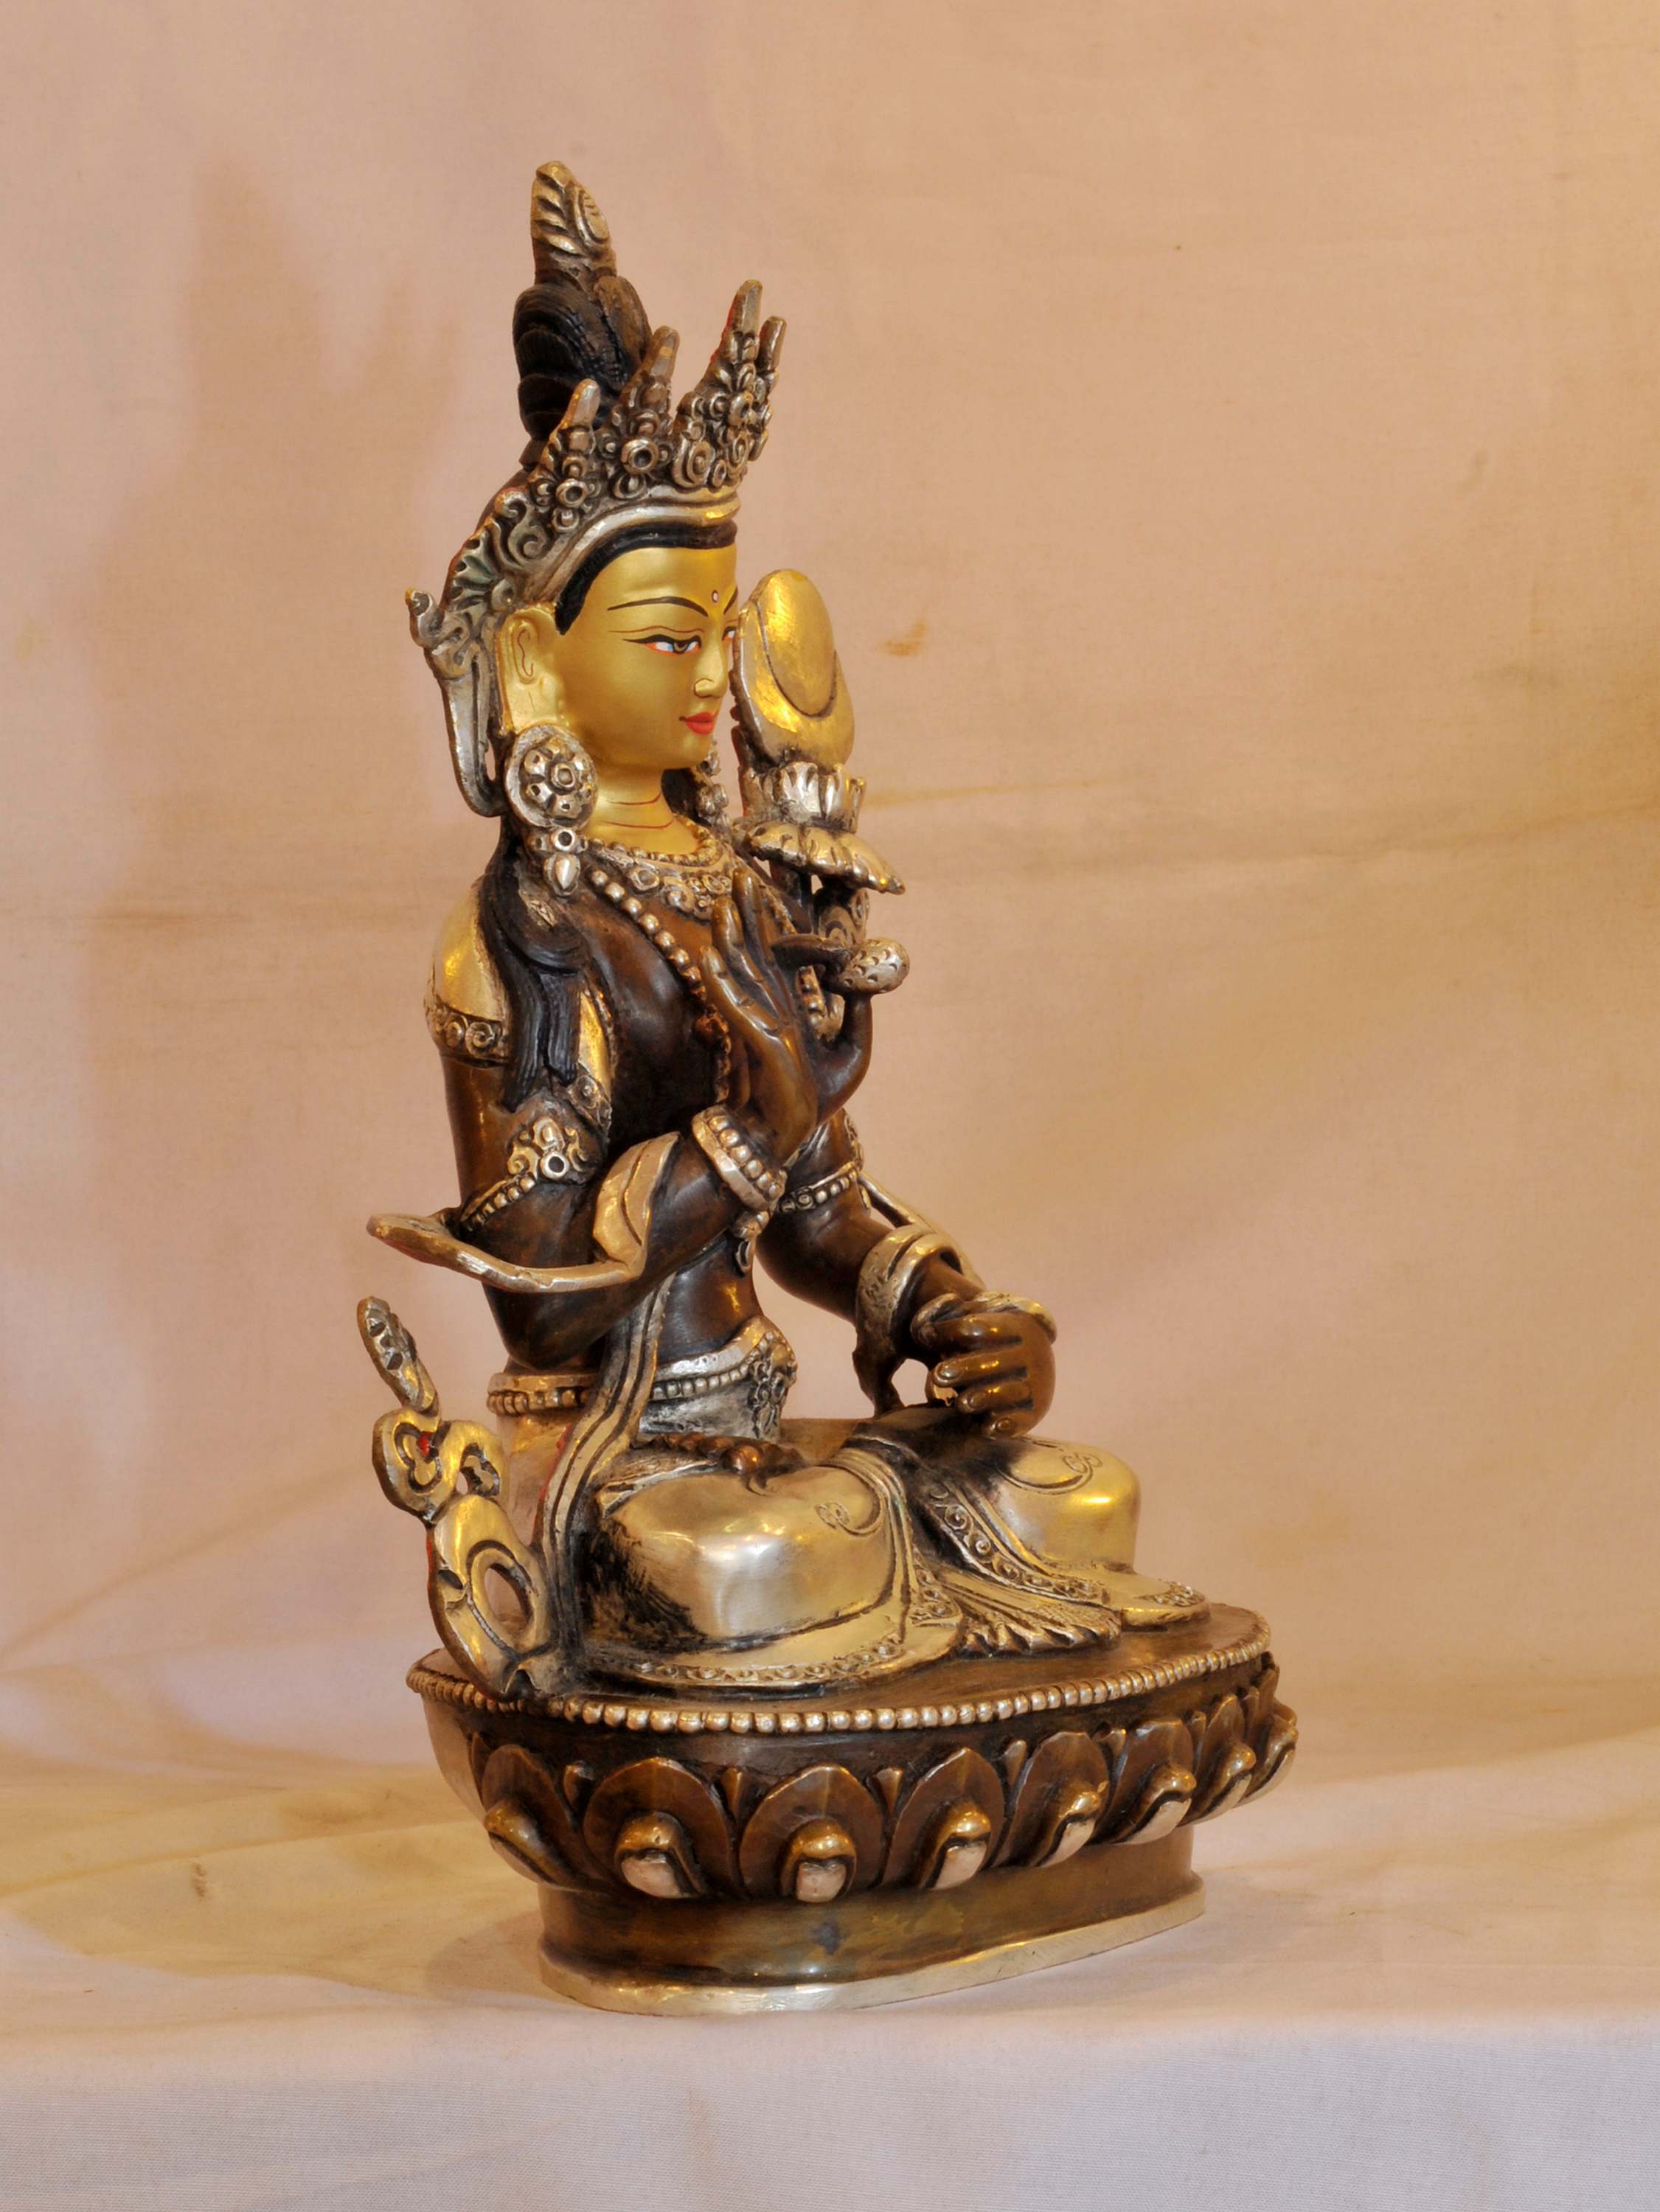 Buddhist Handmade Statue Of bodhisattva, face Painted, silver And Chocolate Oxidized